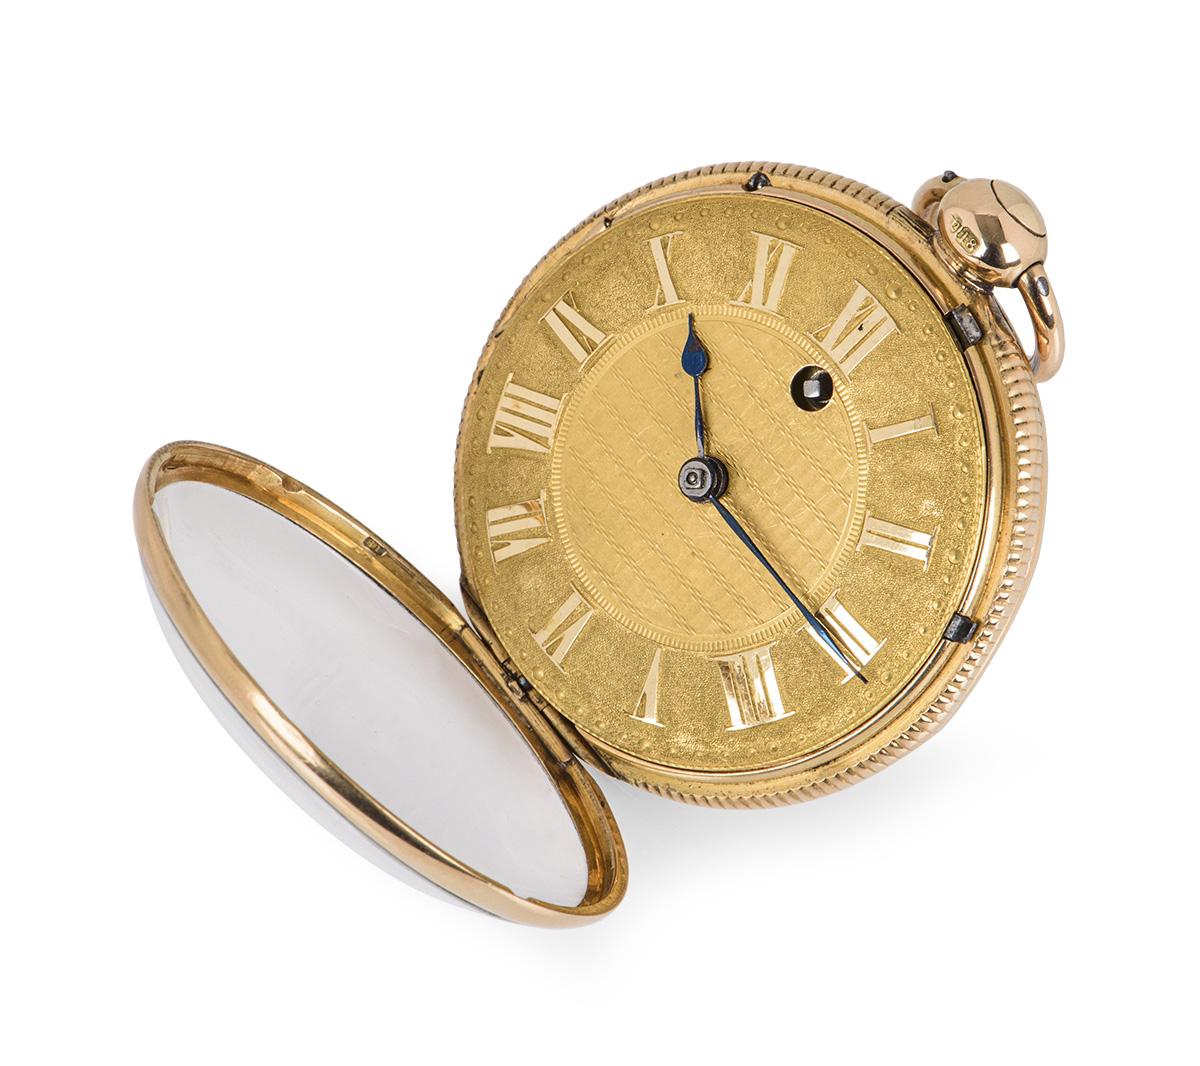 An antique 47 mm rose gold James Squire open face pocket watch by Kendal from around the 1810s. The champagne dial features Roman numerals and blued steel hands. Fitted with mineral glass and a manual key wind movement.

In excellent condition,